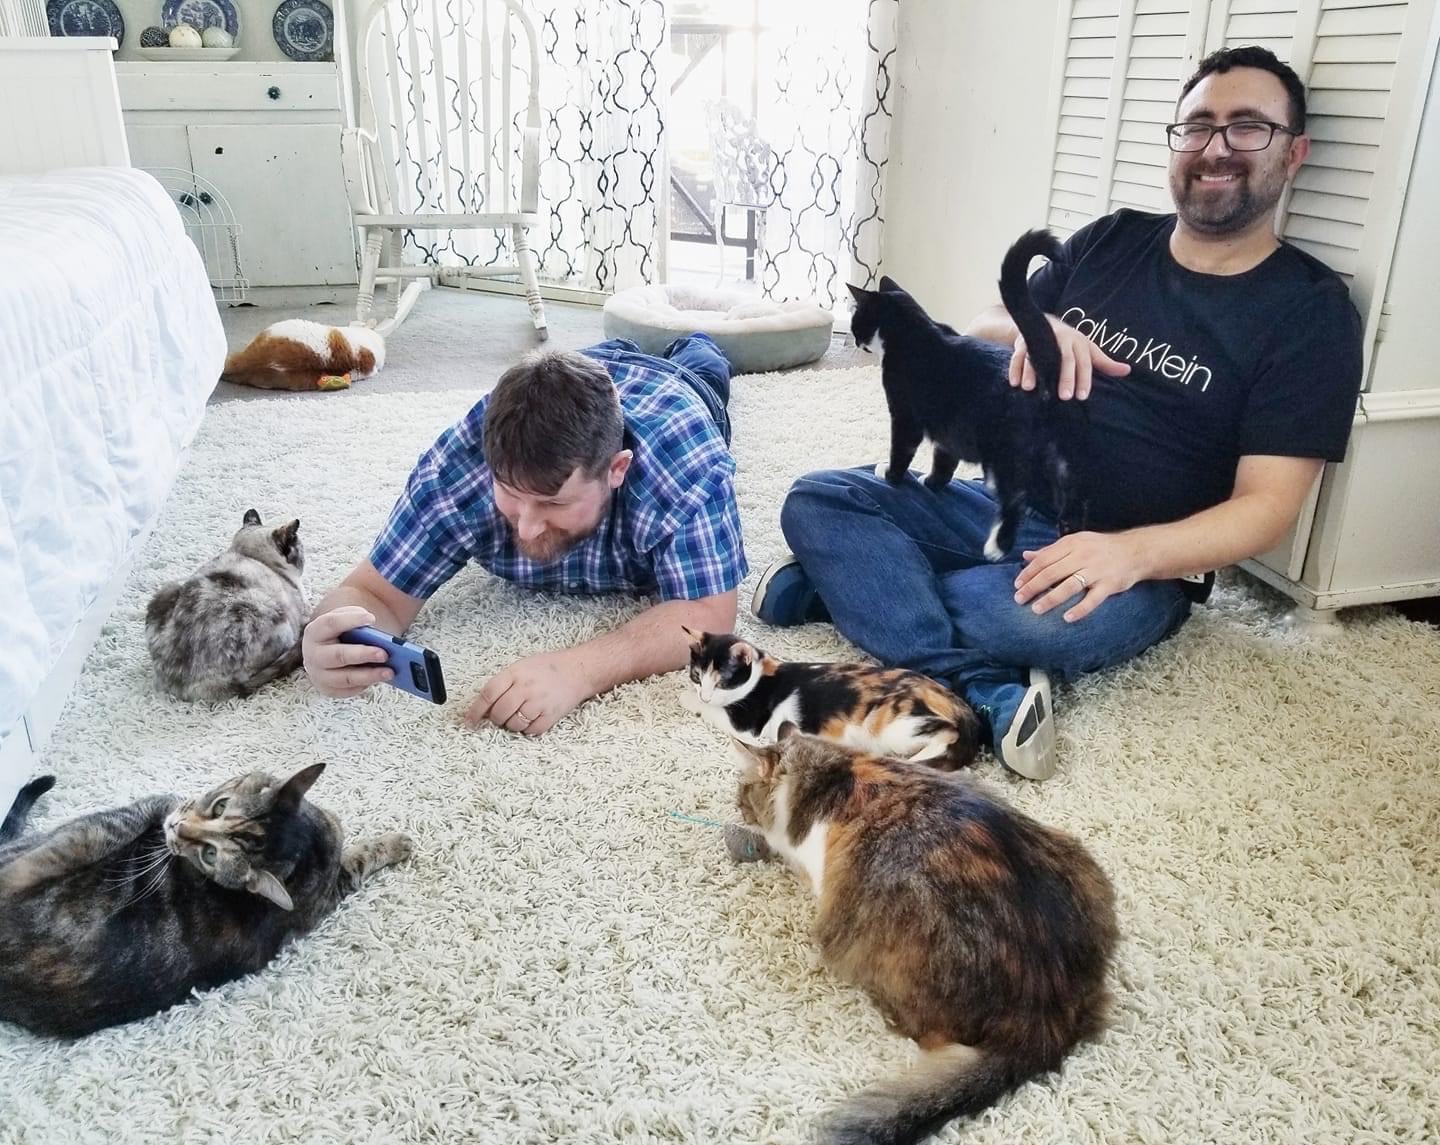 Bryan Silverberg and his husband interacting with cats.